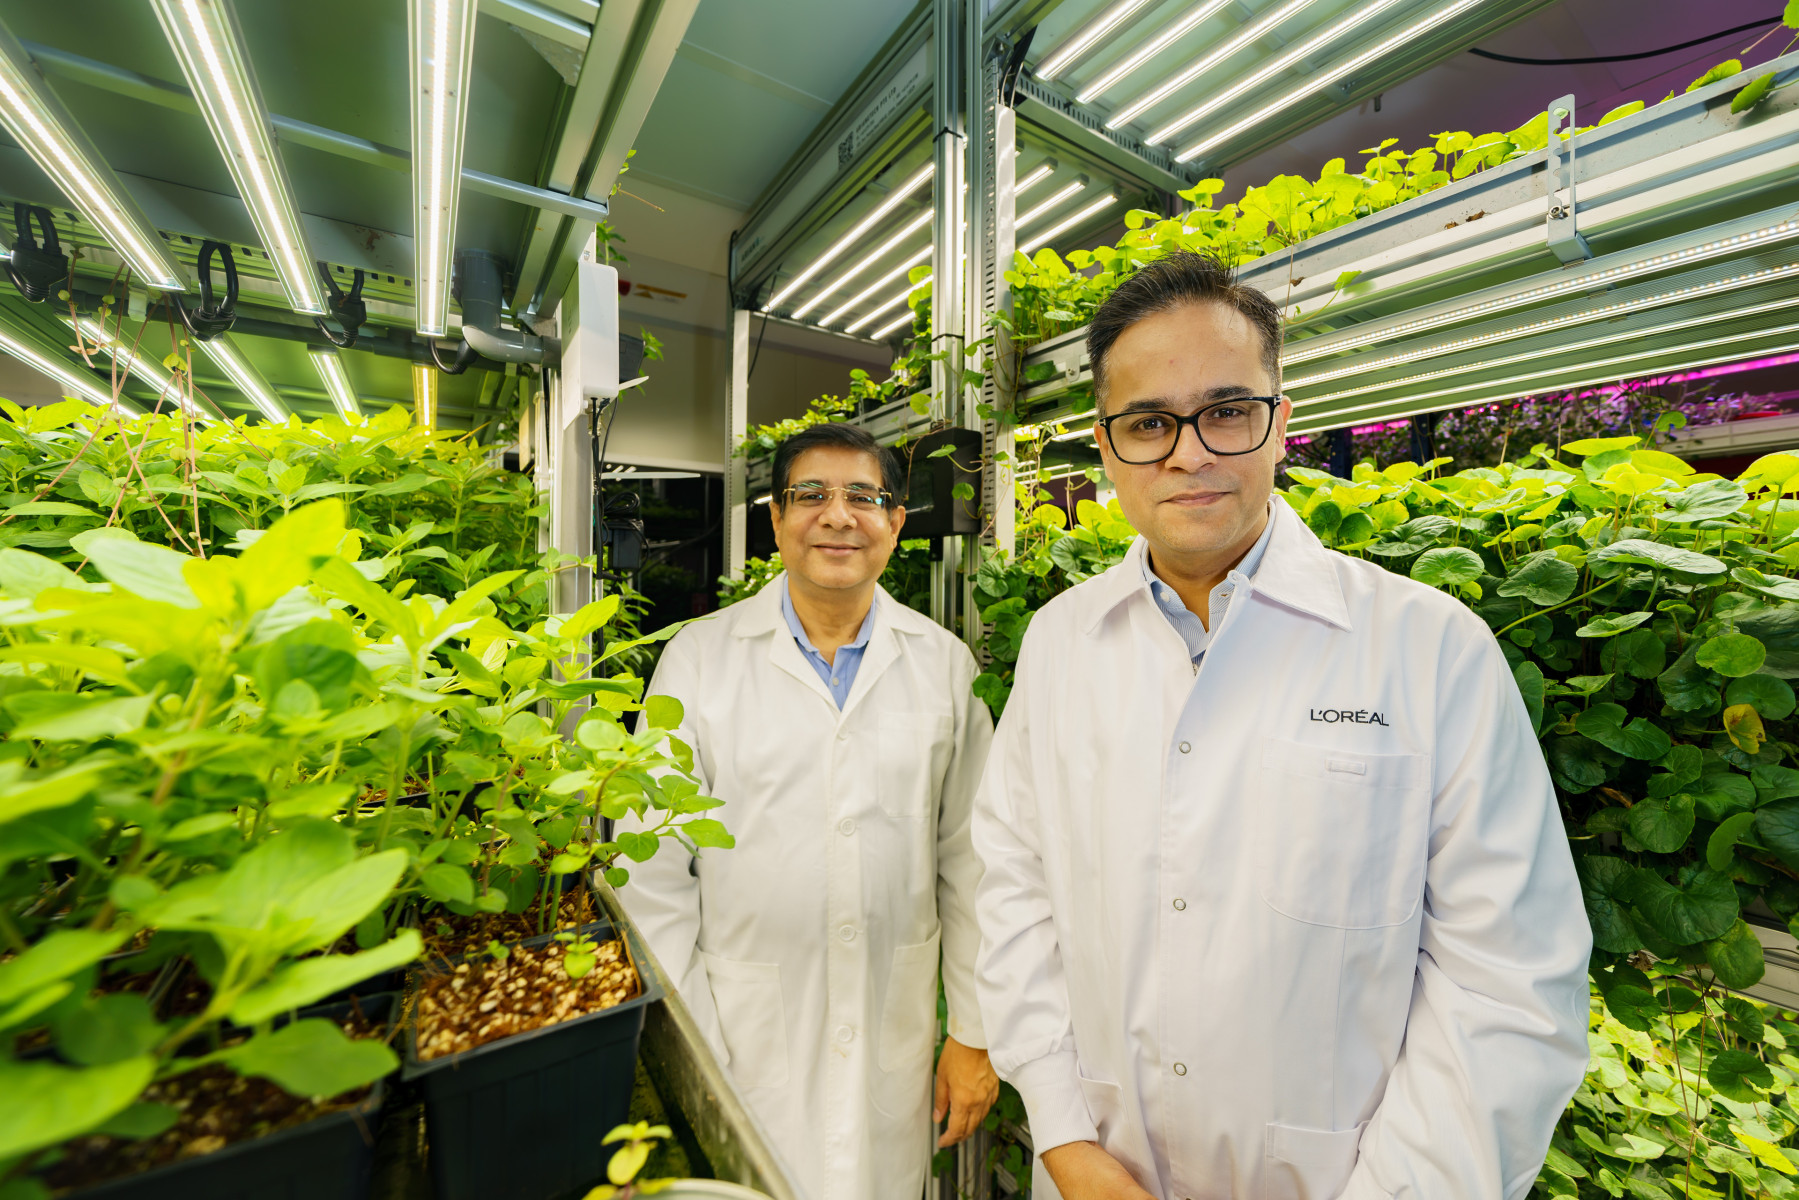 The joint research initiative between NERI and L'Oréal Singapore aims to find new ways to improve soil health and increase plant yield without needing more land or relying on chemical fertilisers. (Photo: L’Oréal Singapore)